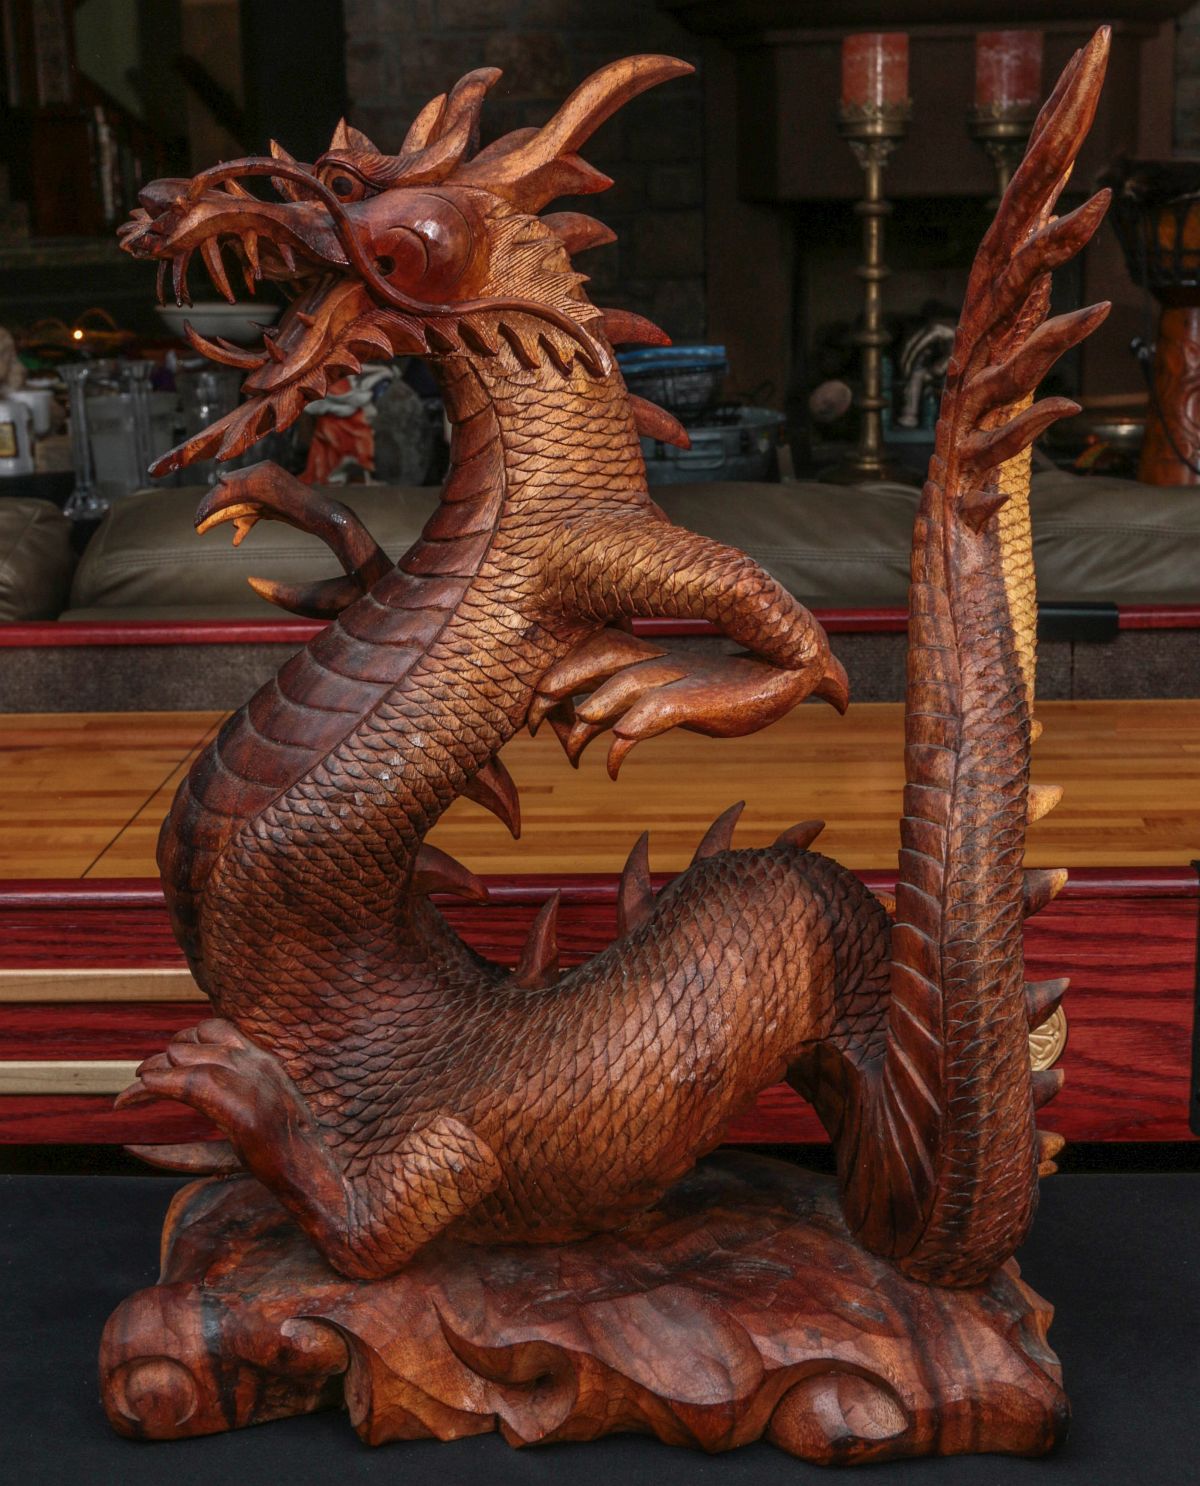 A DETAILED 23-INCH DRAGON CARVED FROM MAHOGANY